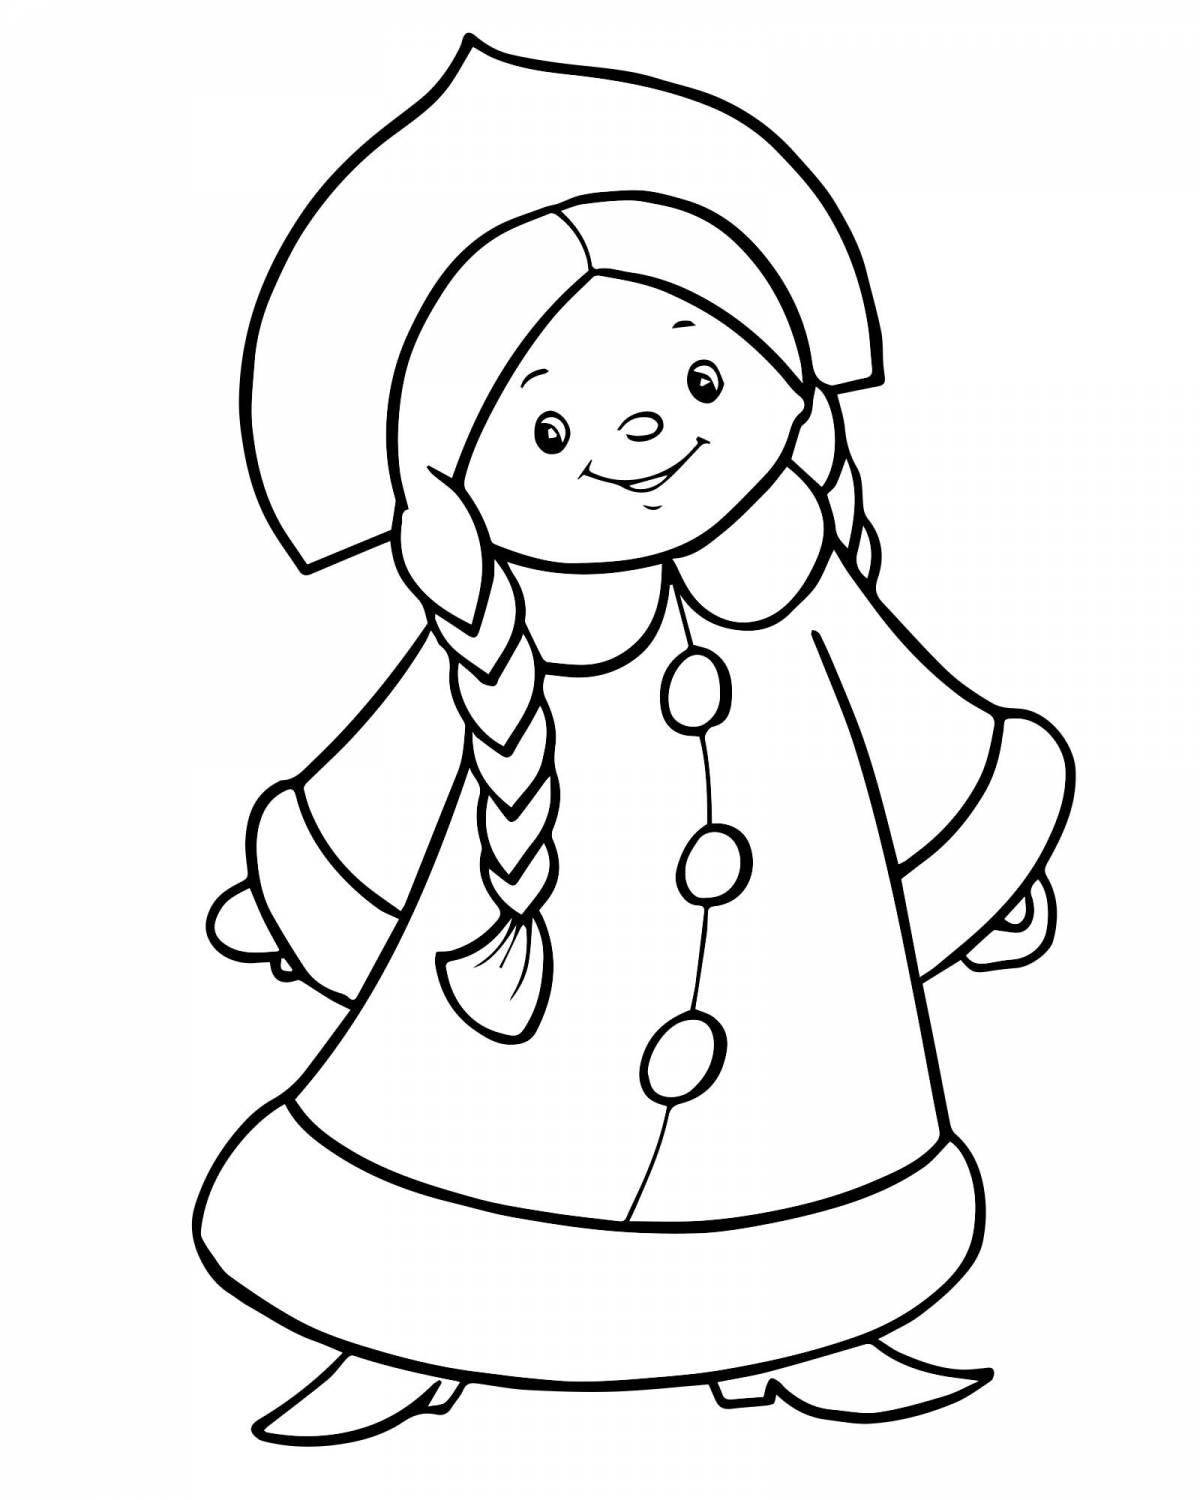 Coloring book shining face of the snow maiden